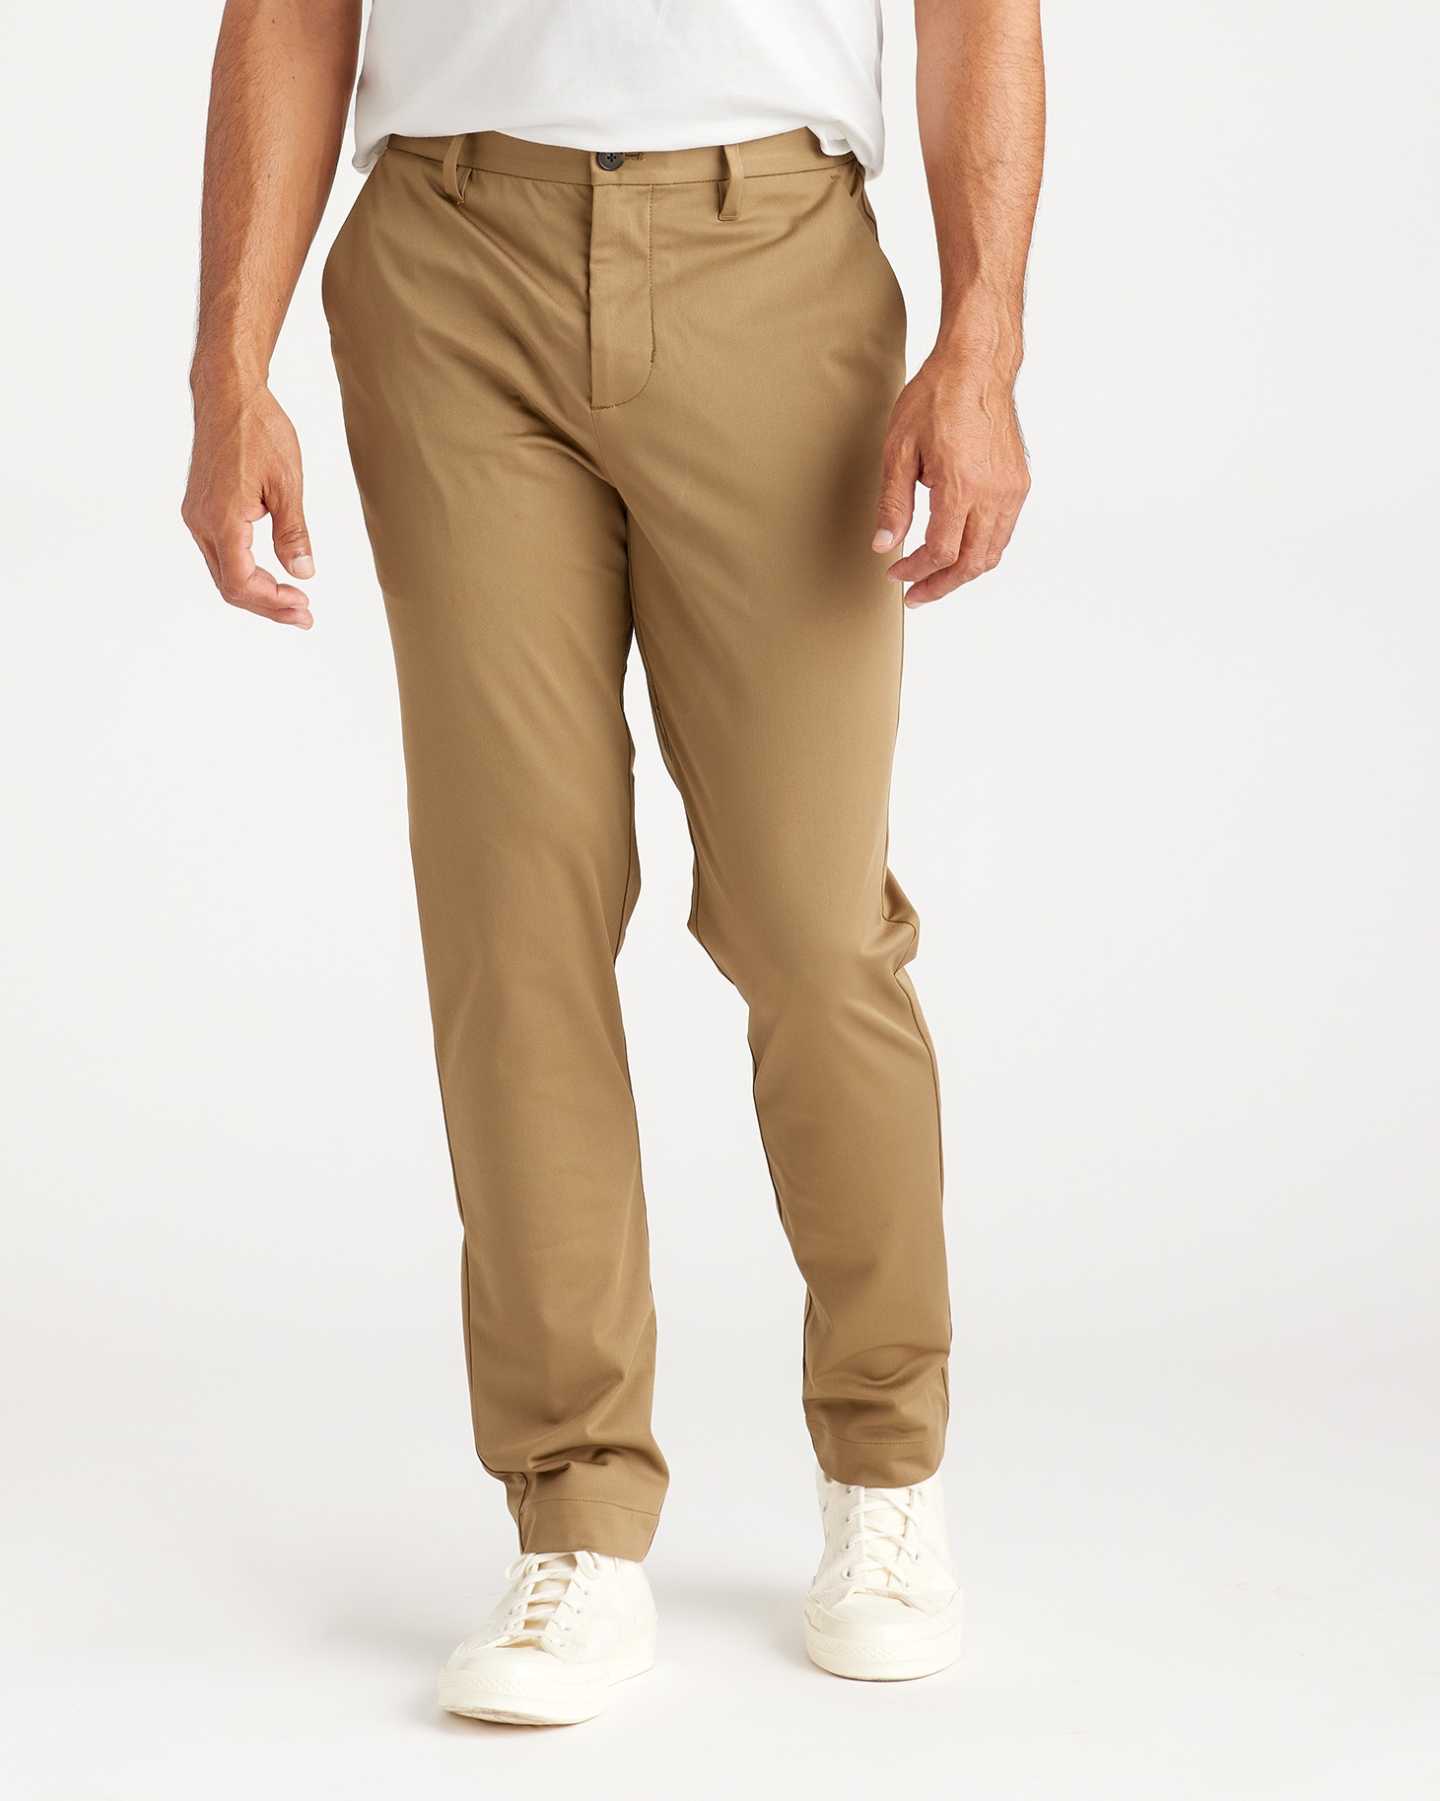 Pair With - Recycled Comfort Tech Chino (Slim Fit) - Light Khaki